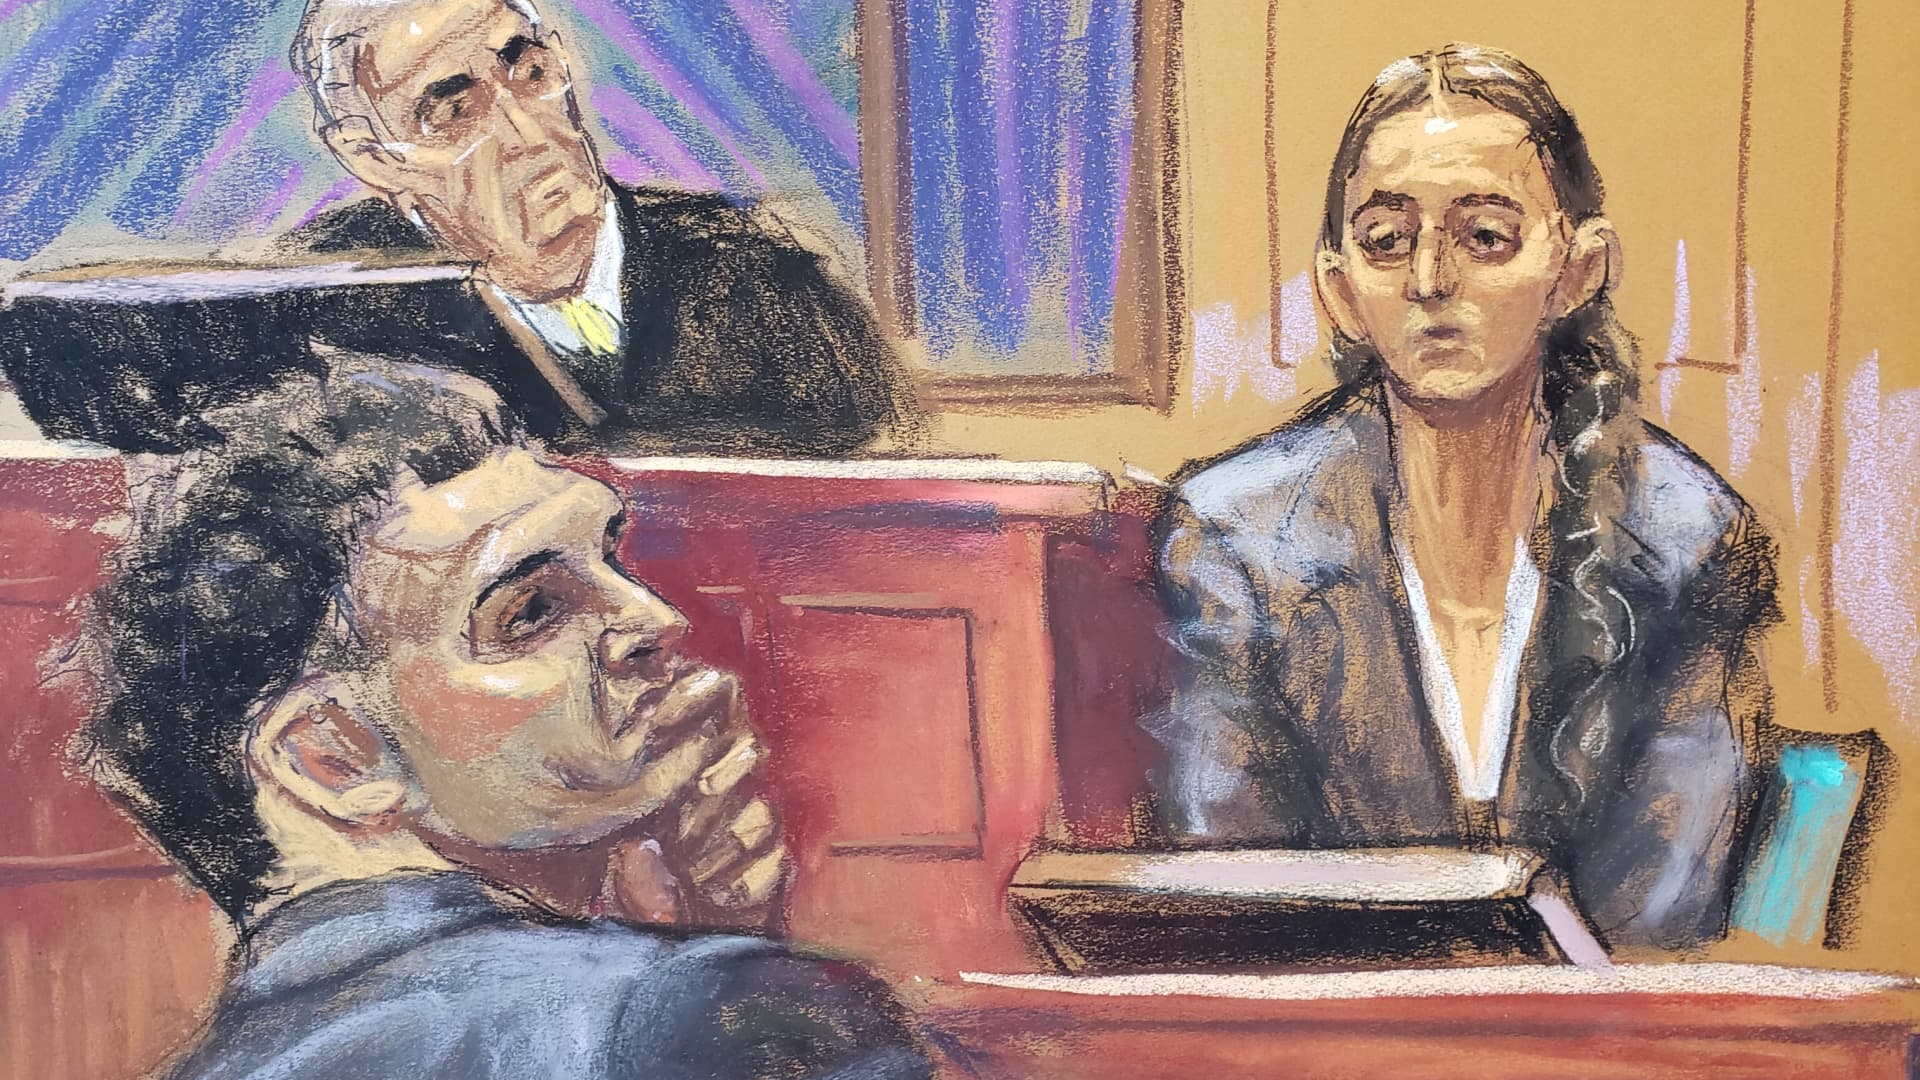 Caroline Ellison is questioned as Sam Bankman-Fried watches during his fraud trial before U.S. District Judge Lewis Kaplan over the collapse of FTX, the bankrupt cryptocurrency exchange, at Federal Court in New York City, October 11, 2023 in this courtroom sketch.